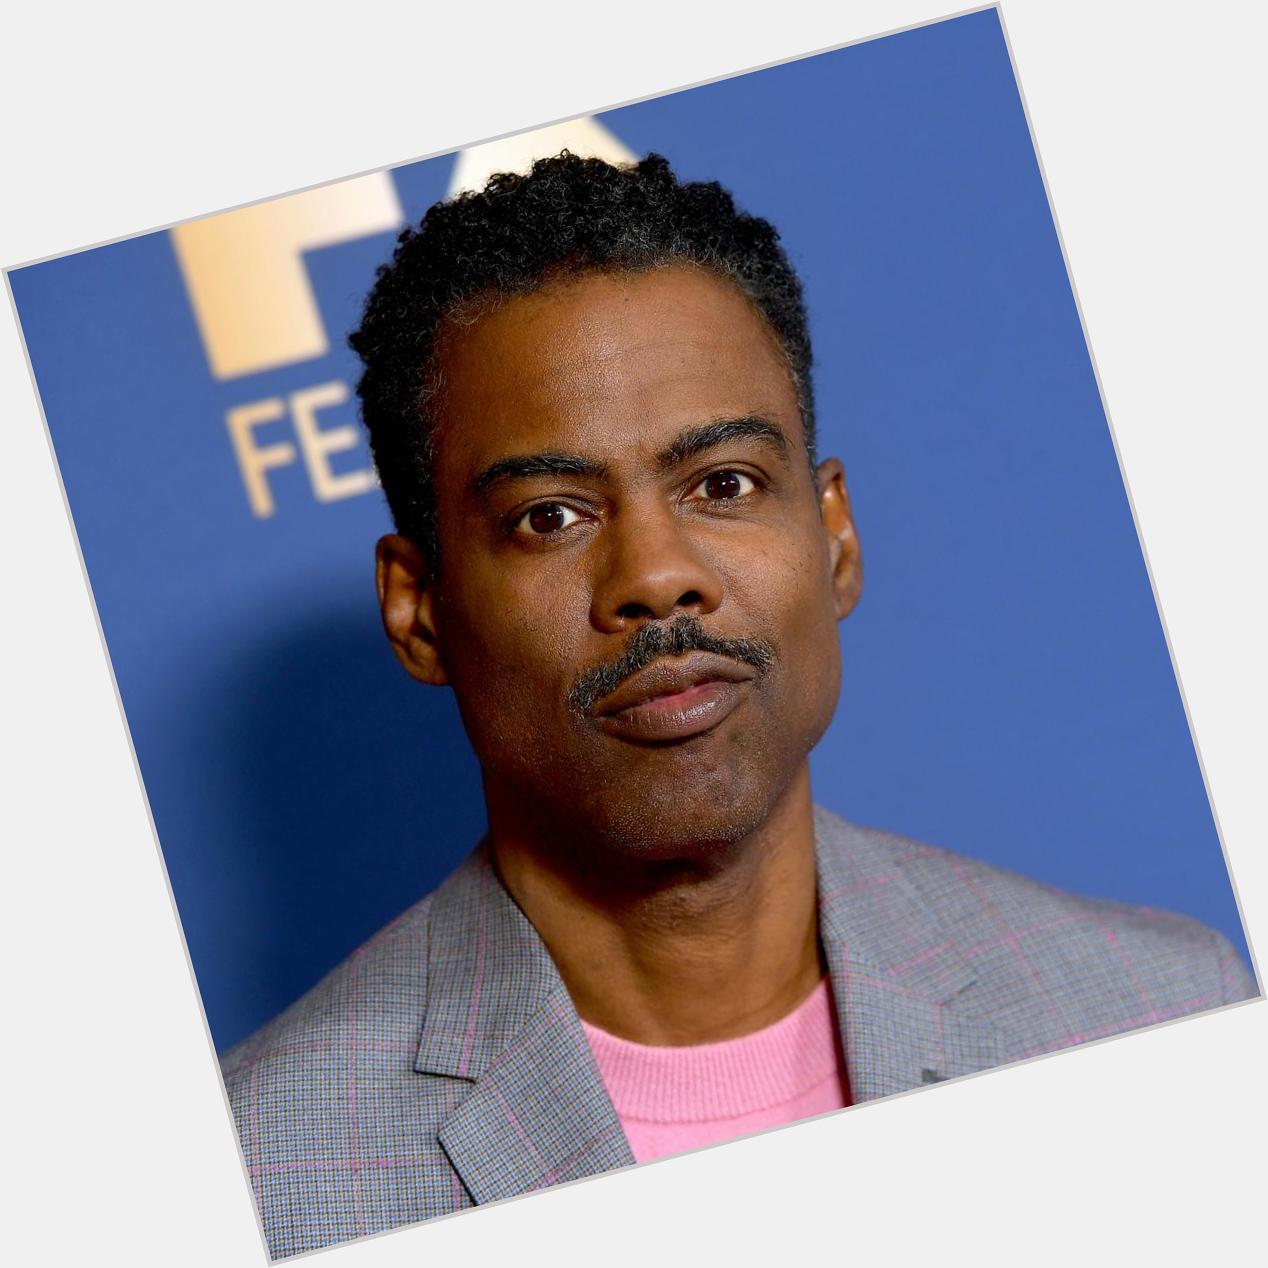 Chris Rock turns 58 years old today, happy birthday 